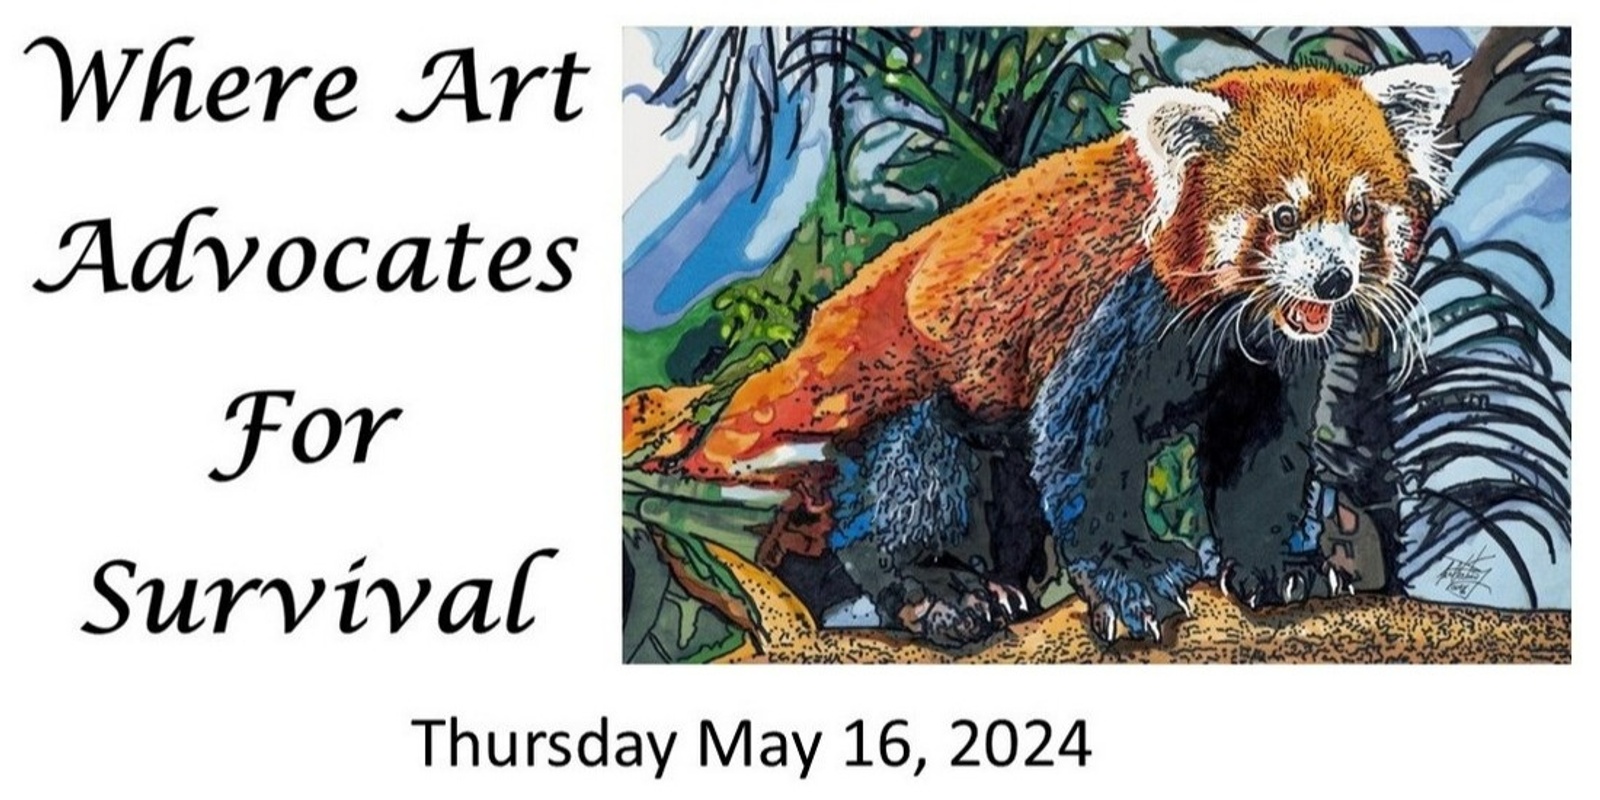 Banner image for Where Art Advocates for Survival - Exhibition and Fundraiser